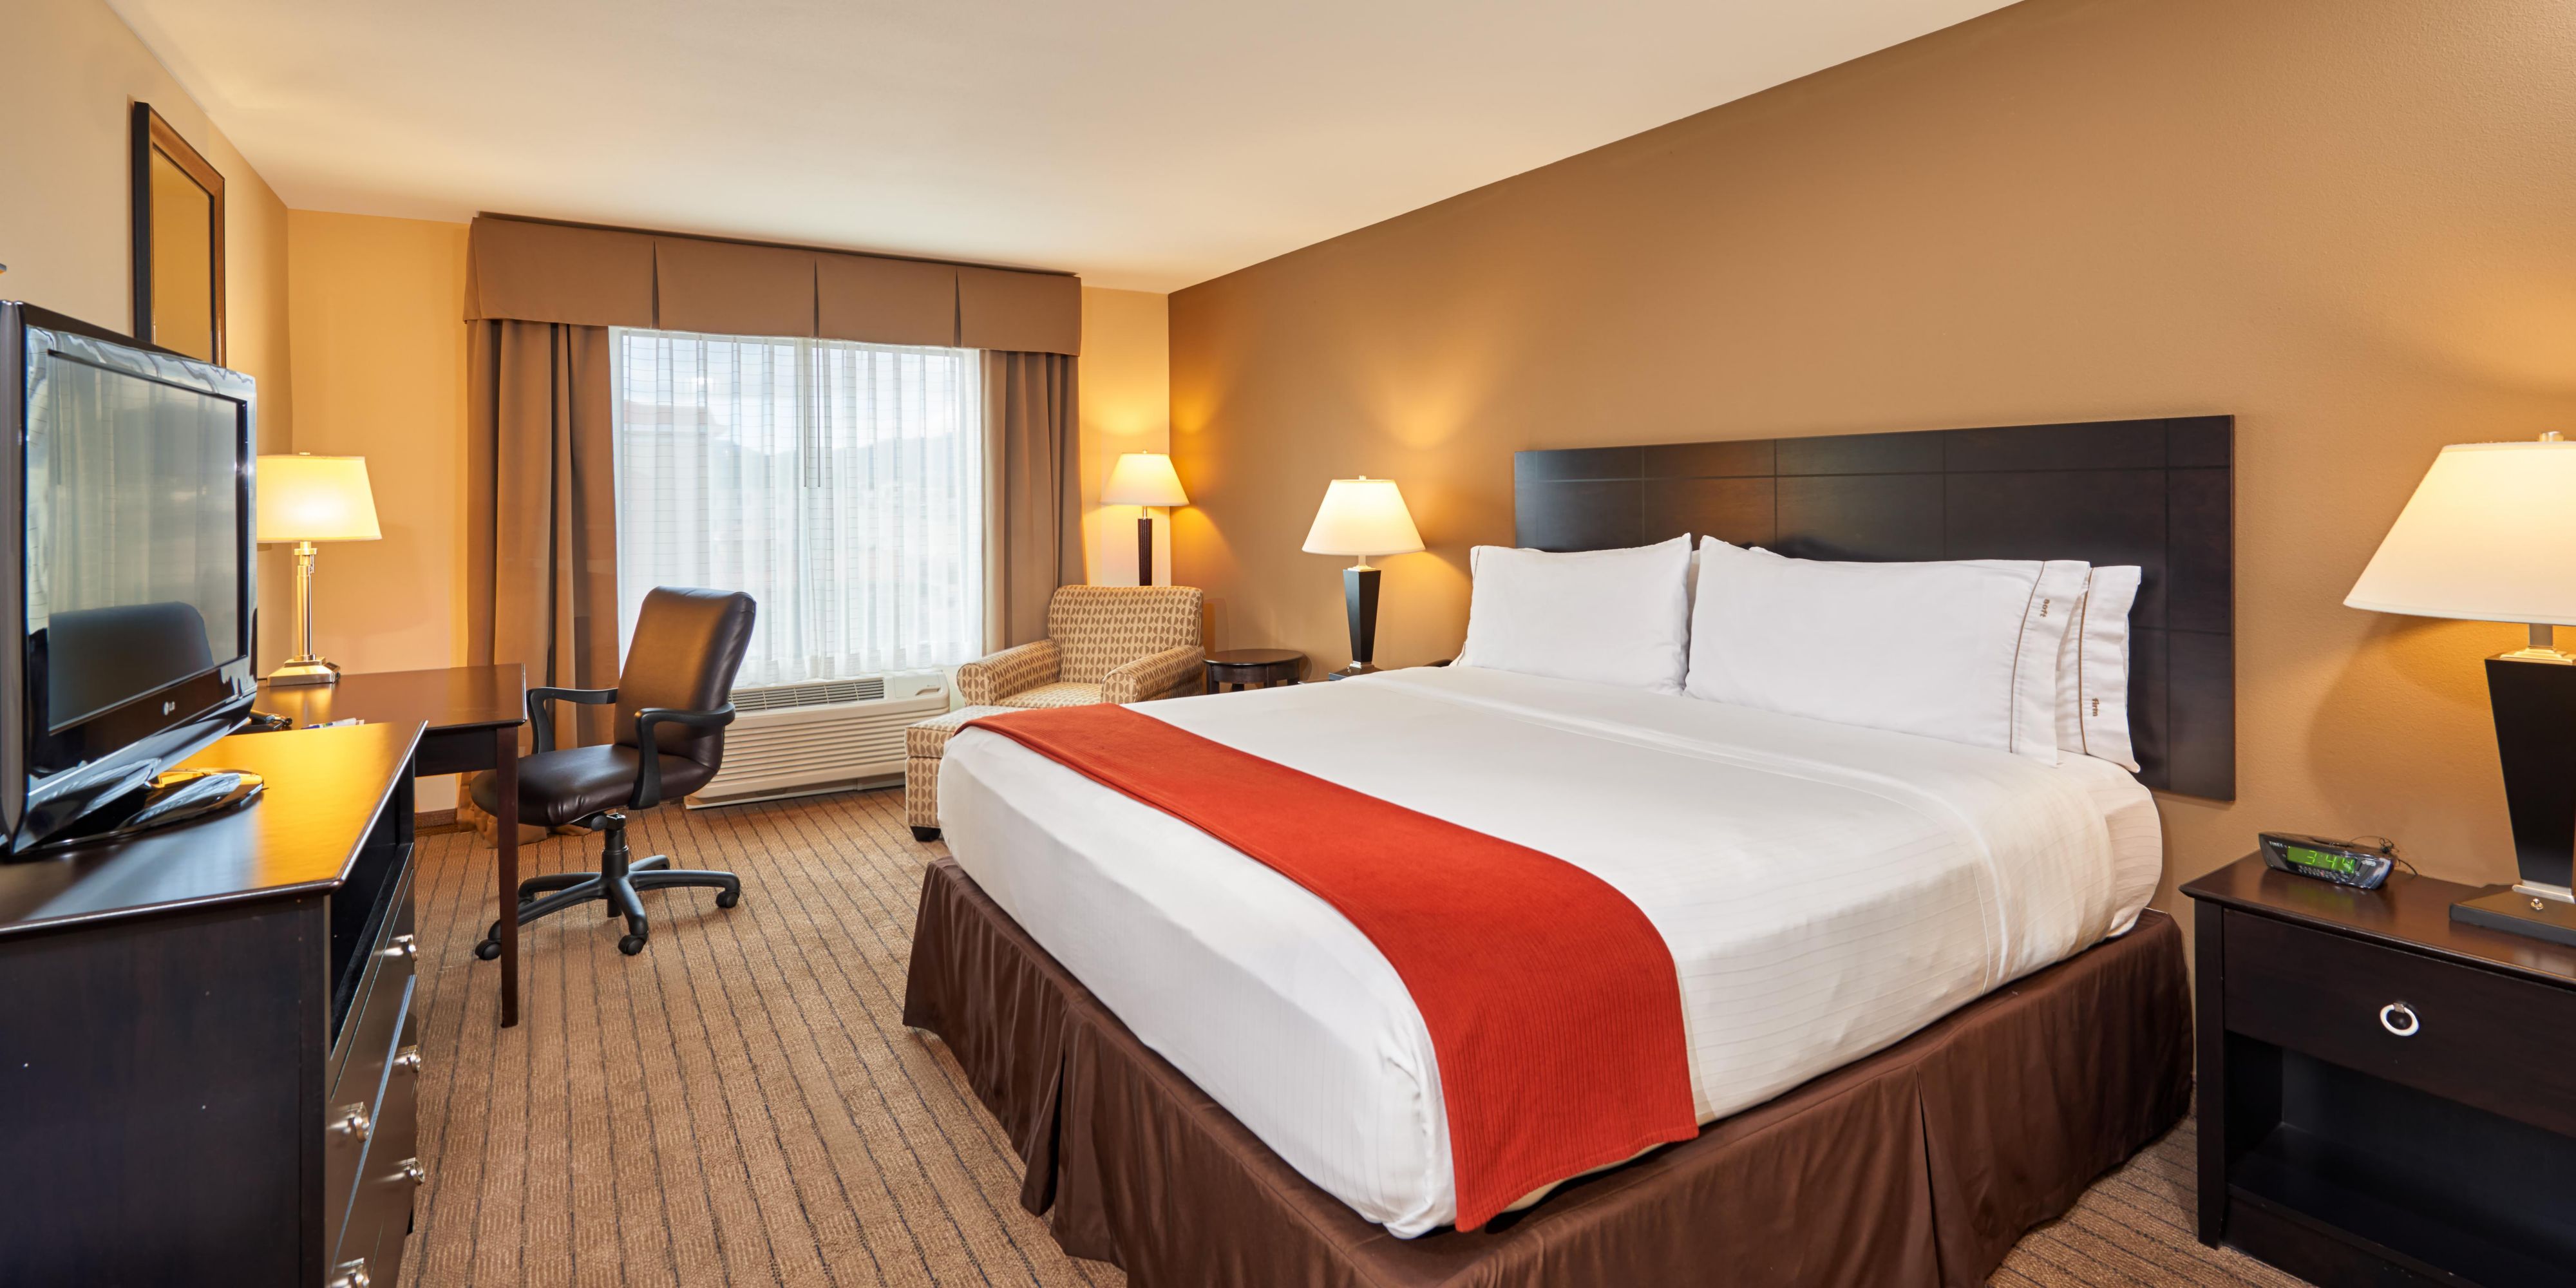 At our hotel, the highest priority remains your safety and comfort, along with the safety of our associates. While cleanliness and safety have always been at a high standard with IHG Way of Clean, the program has been expanded with additional protocols and best practices.